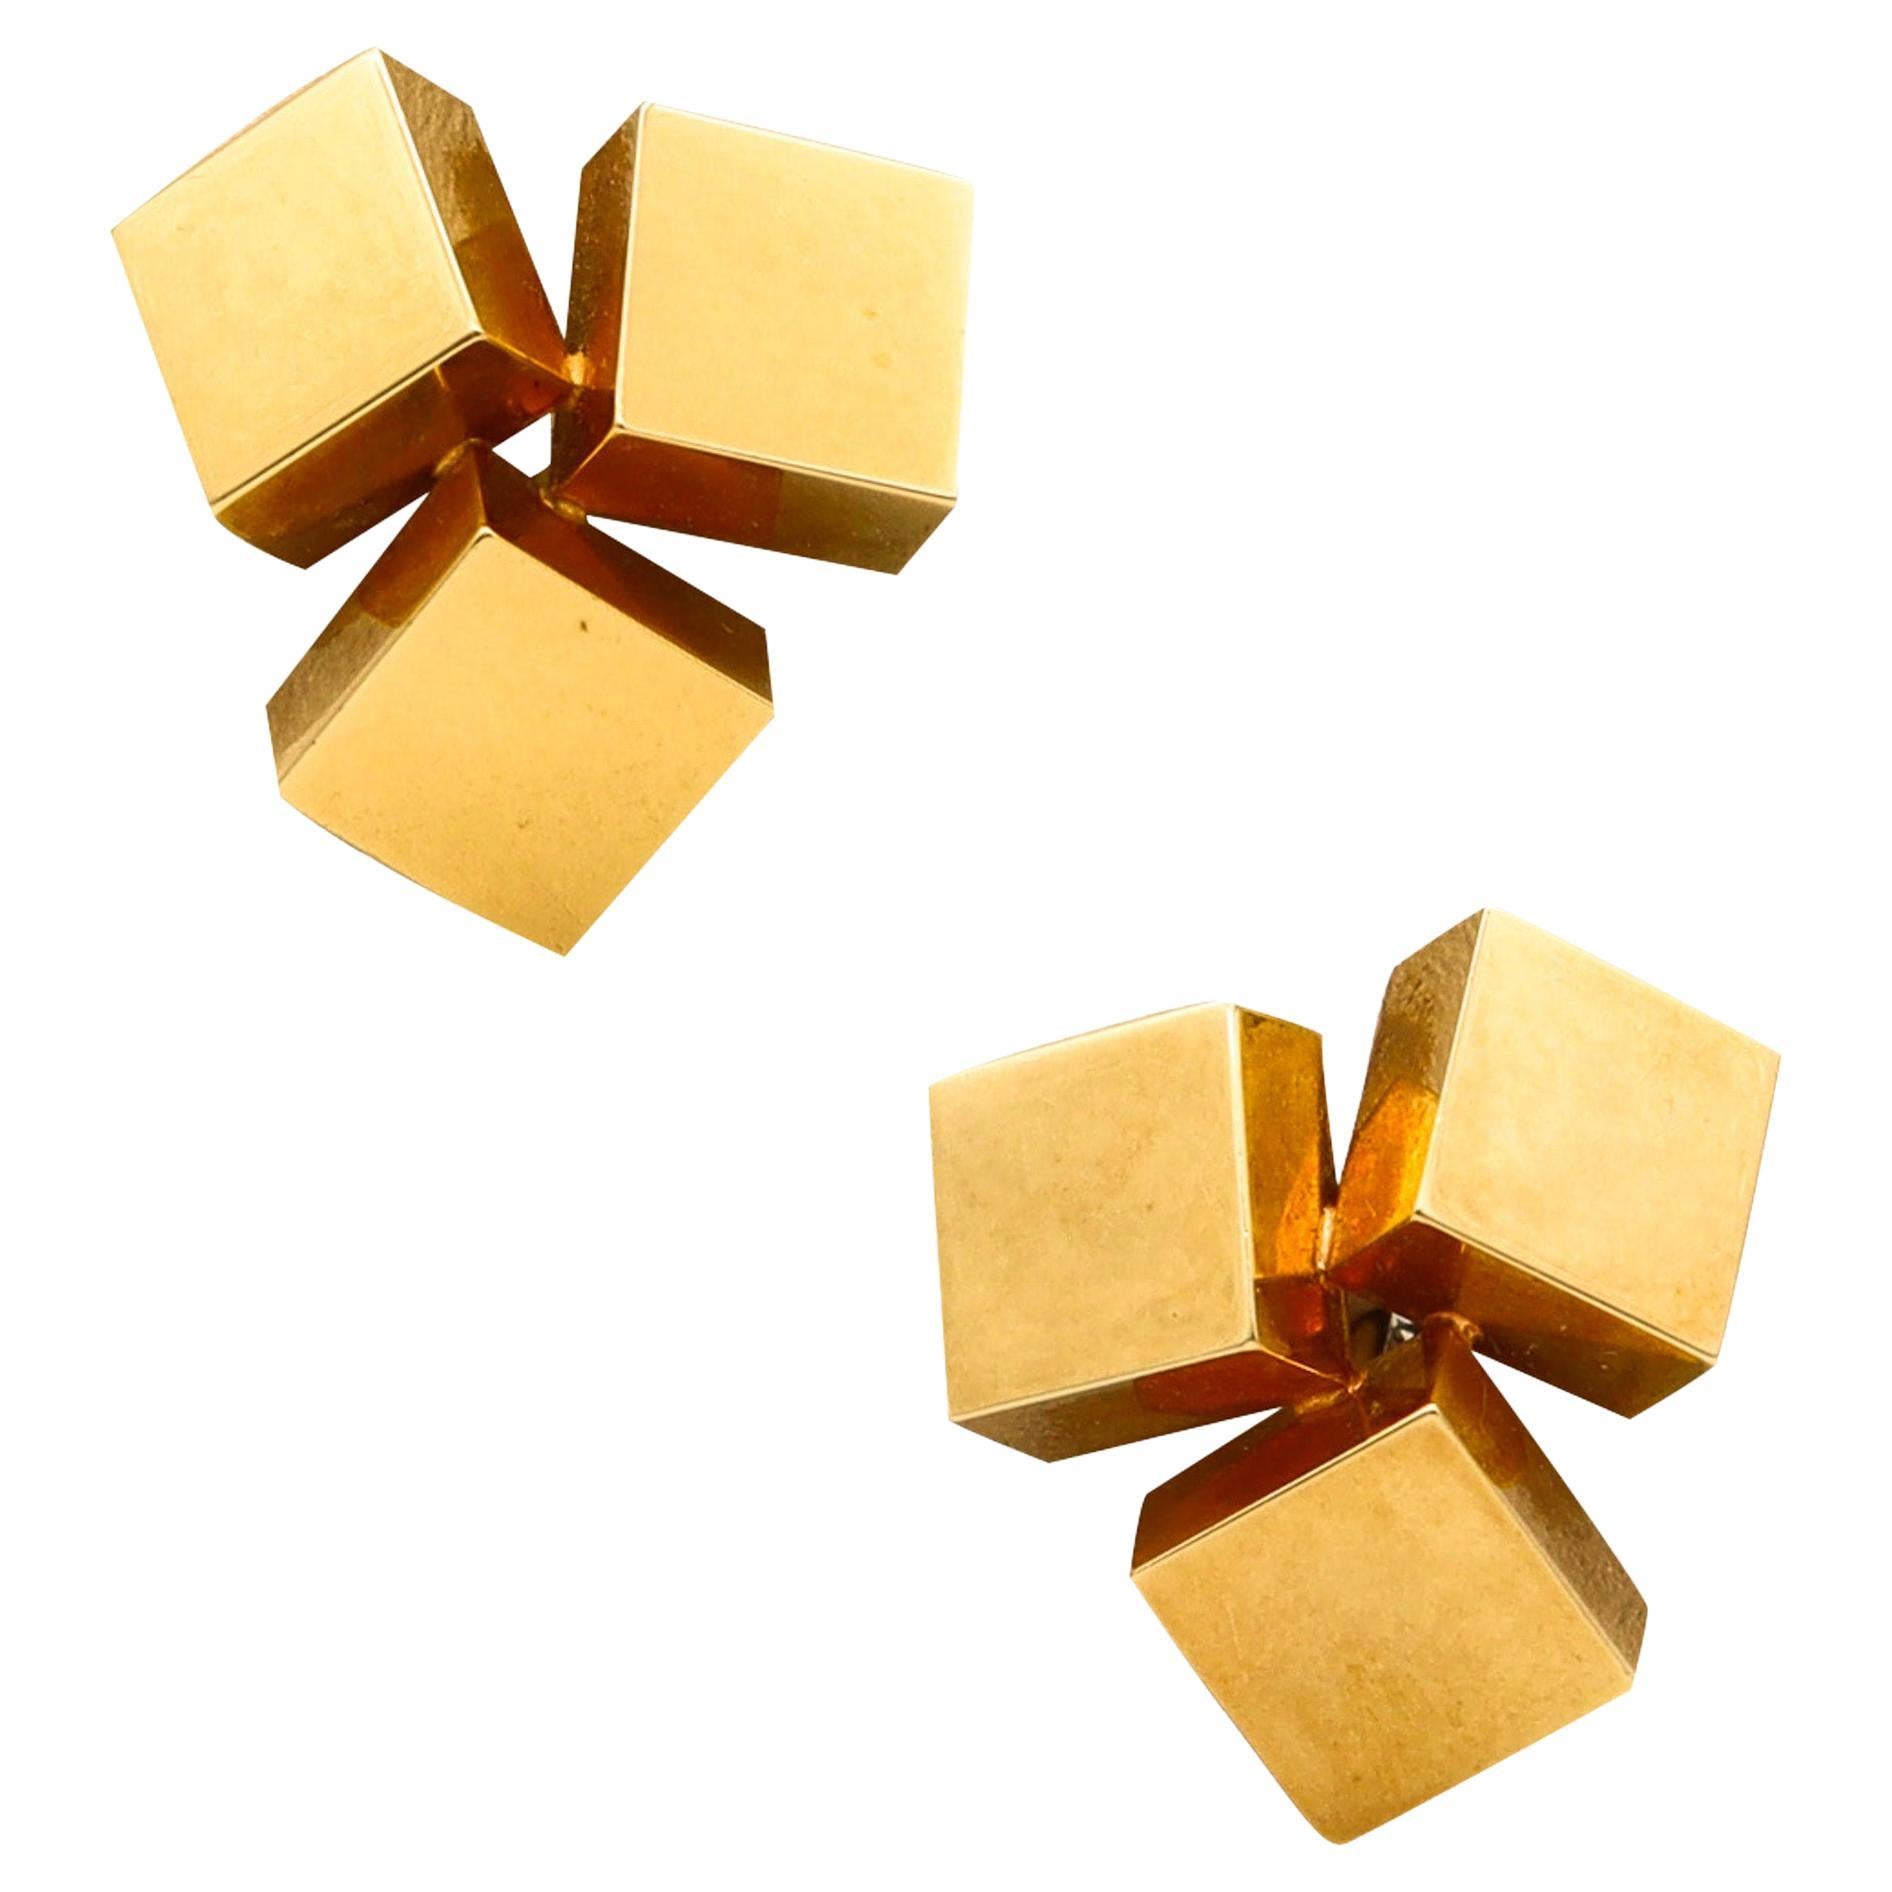 Antonio Cavelti 1970 For Birks Geometric Sculptural Earrings In 18Kt Yellow Gold For Sale